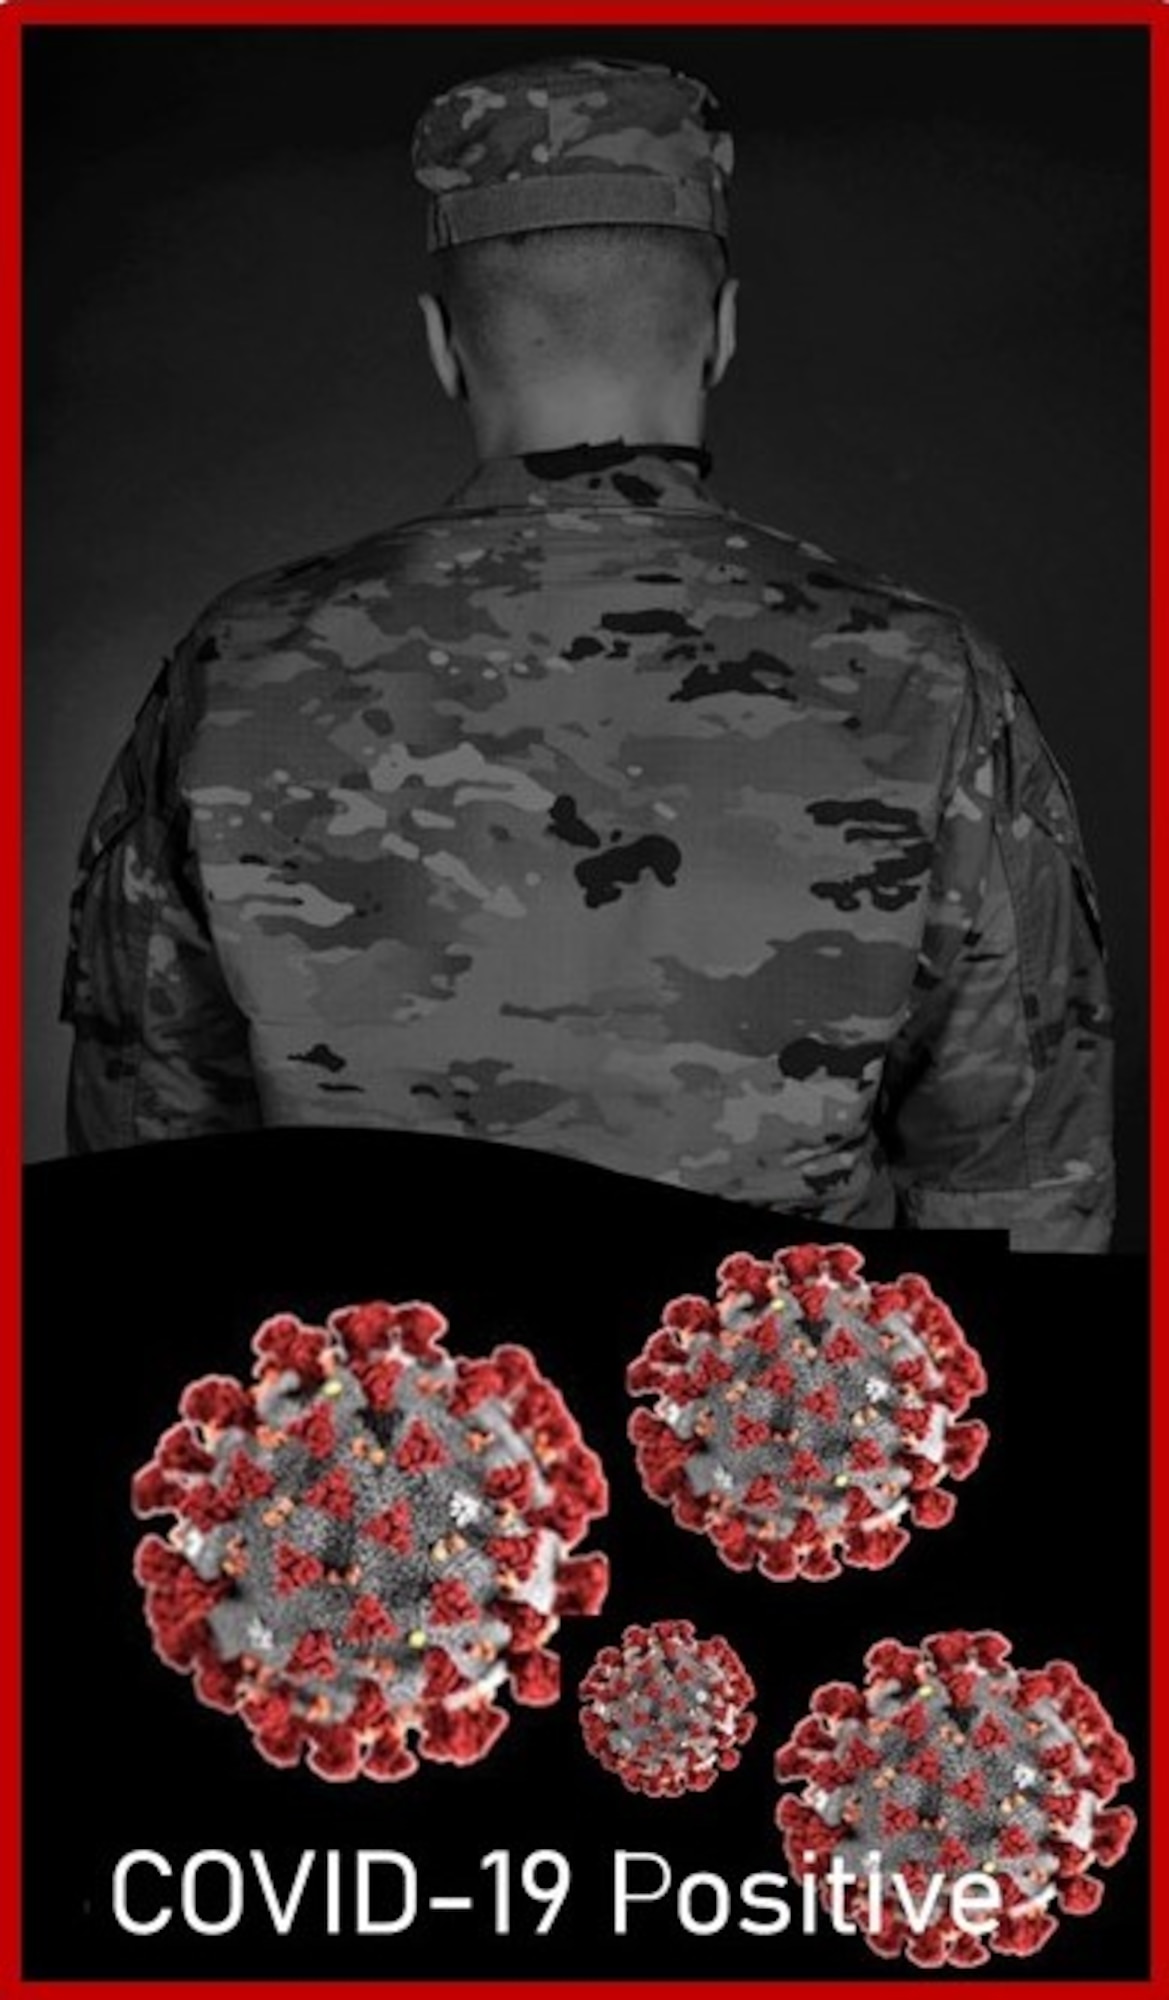 Graphic shows the back of an Airman with coronavirus cells on the bottom of graphic.